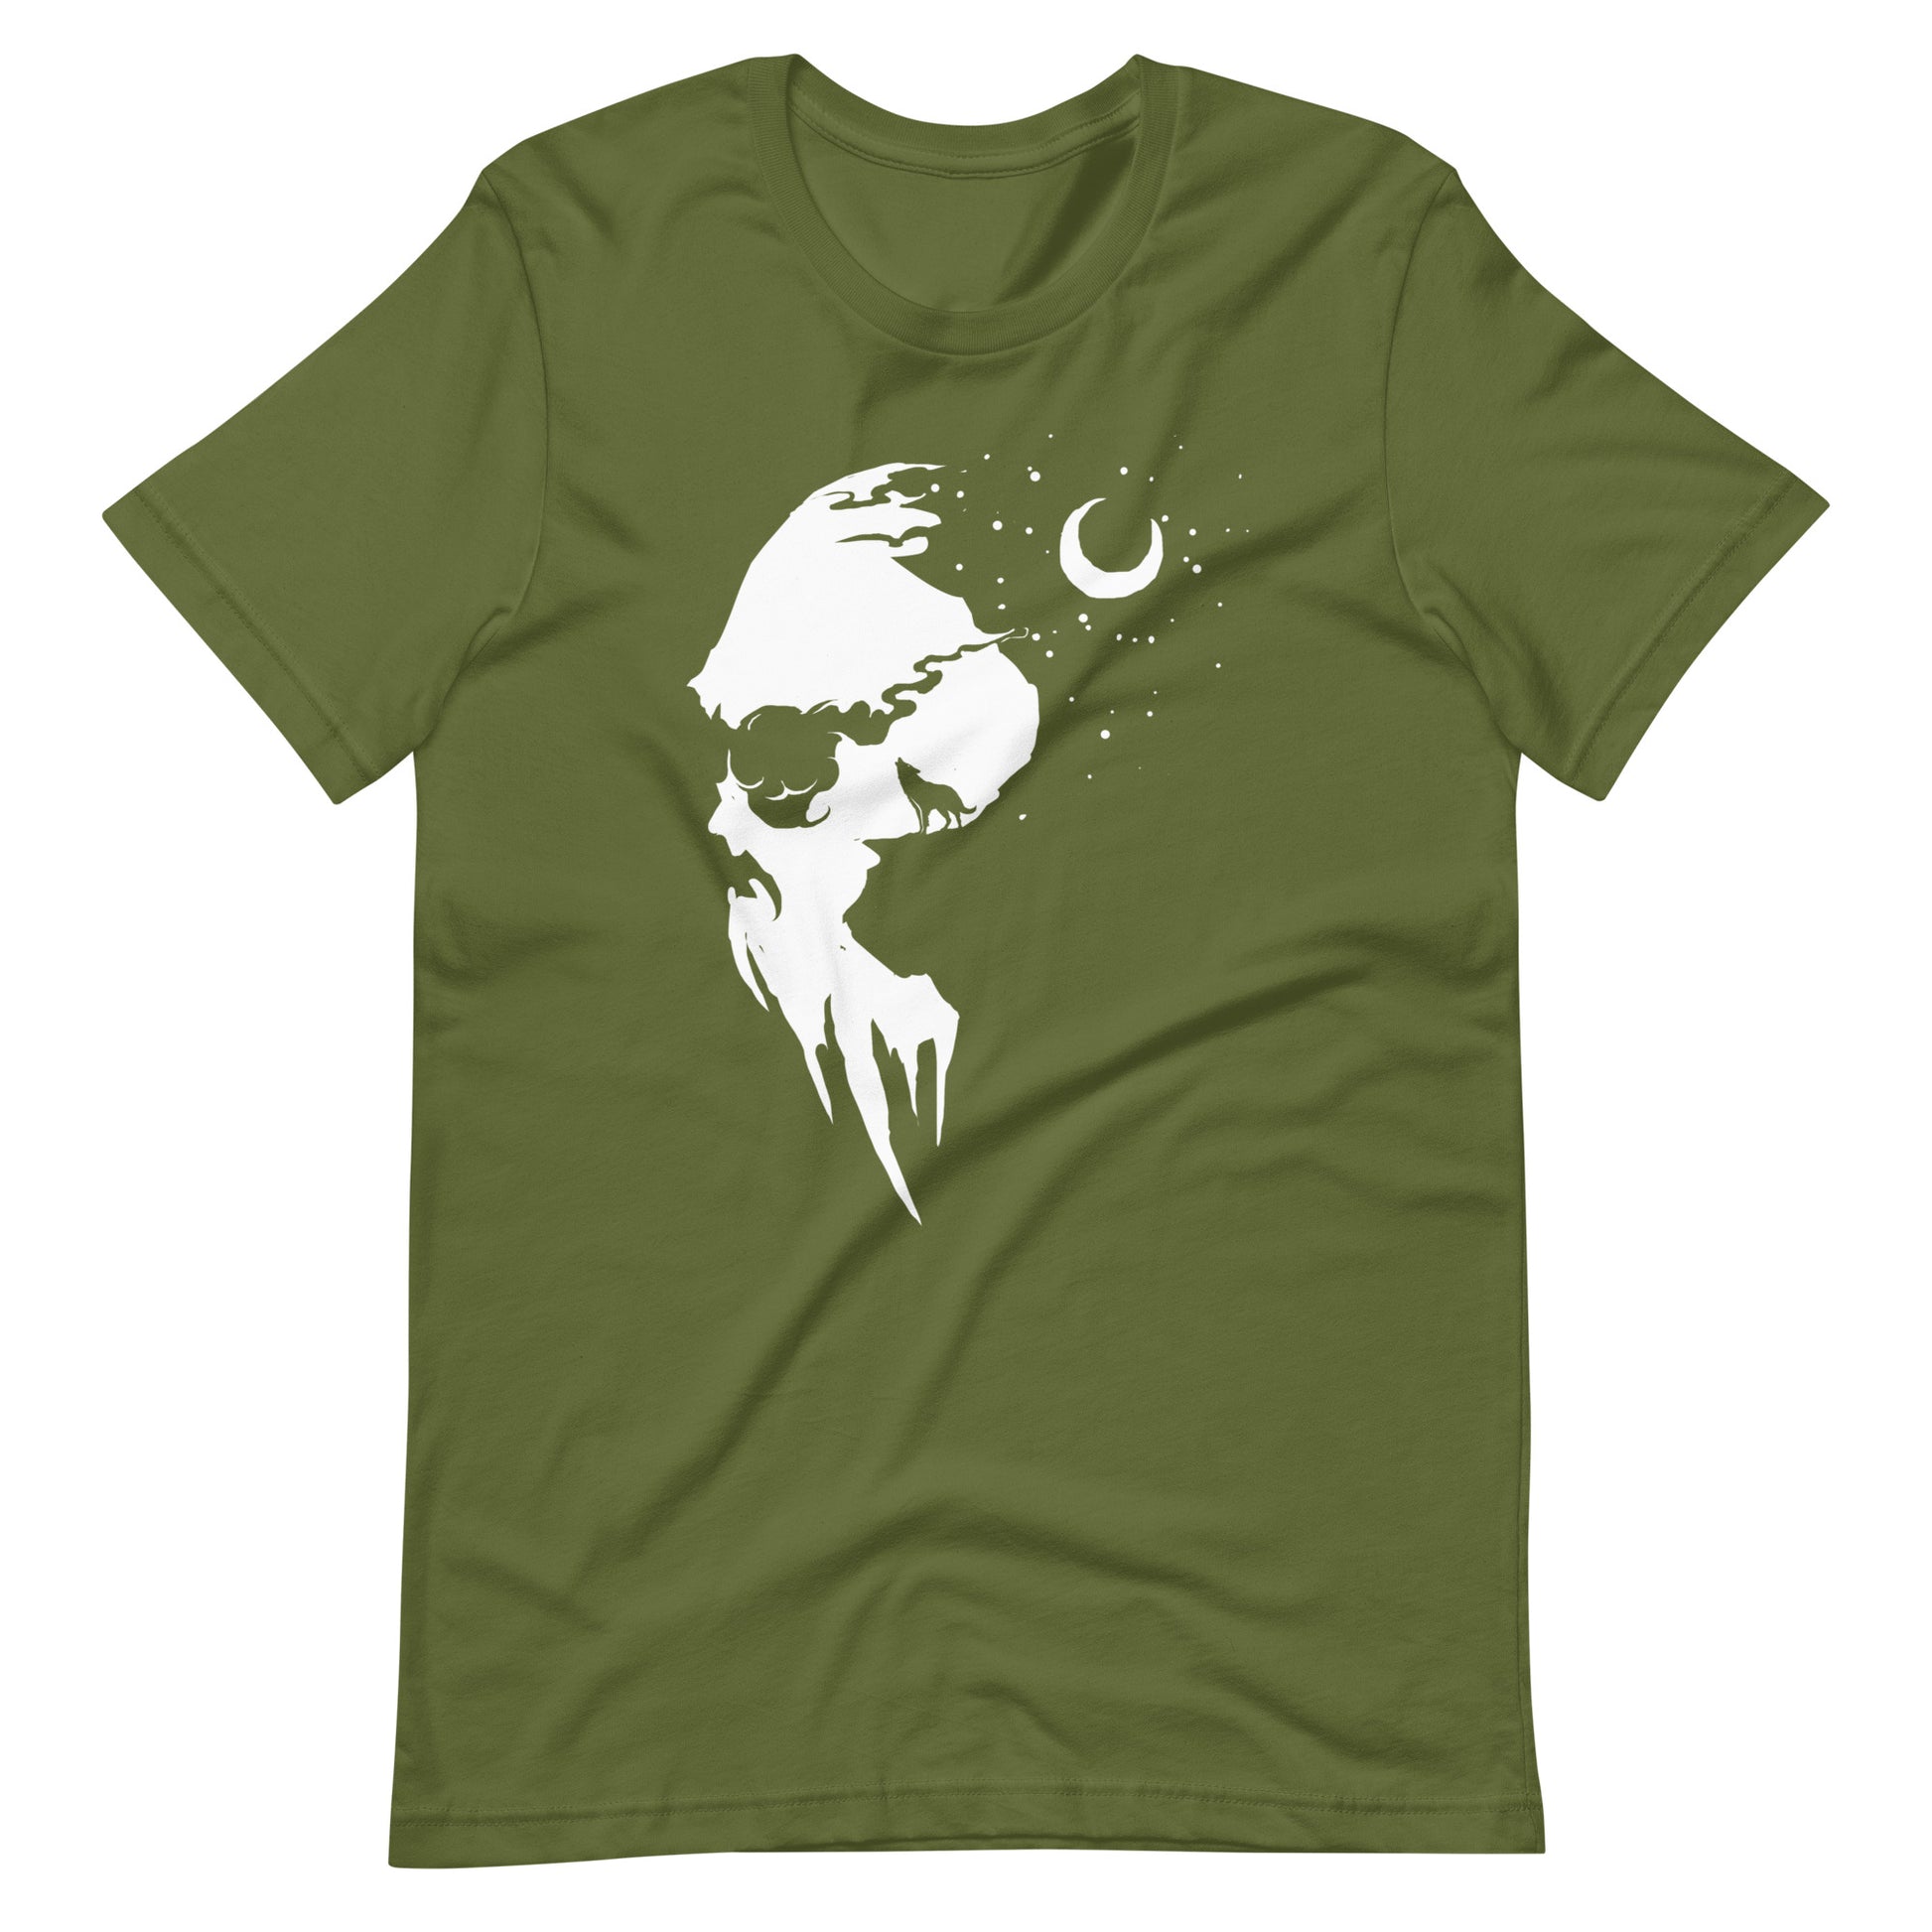 The Night Has Come - Men's t-shirt - Olive Front